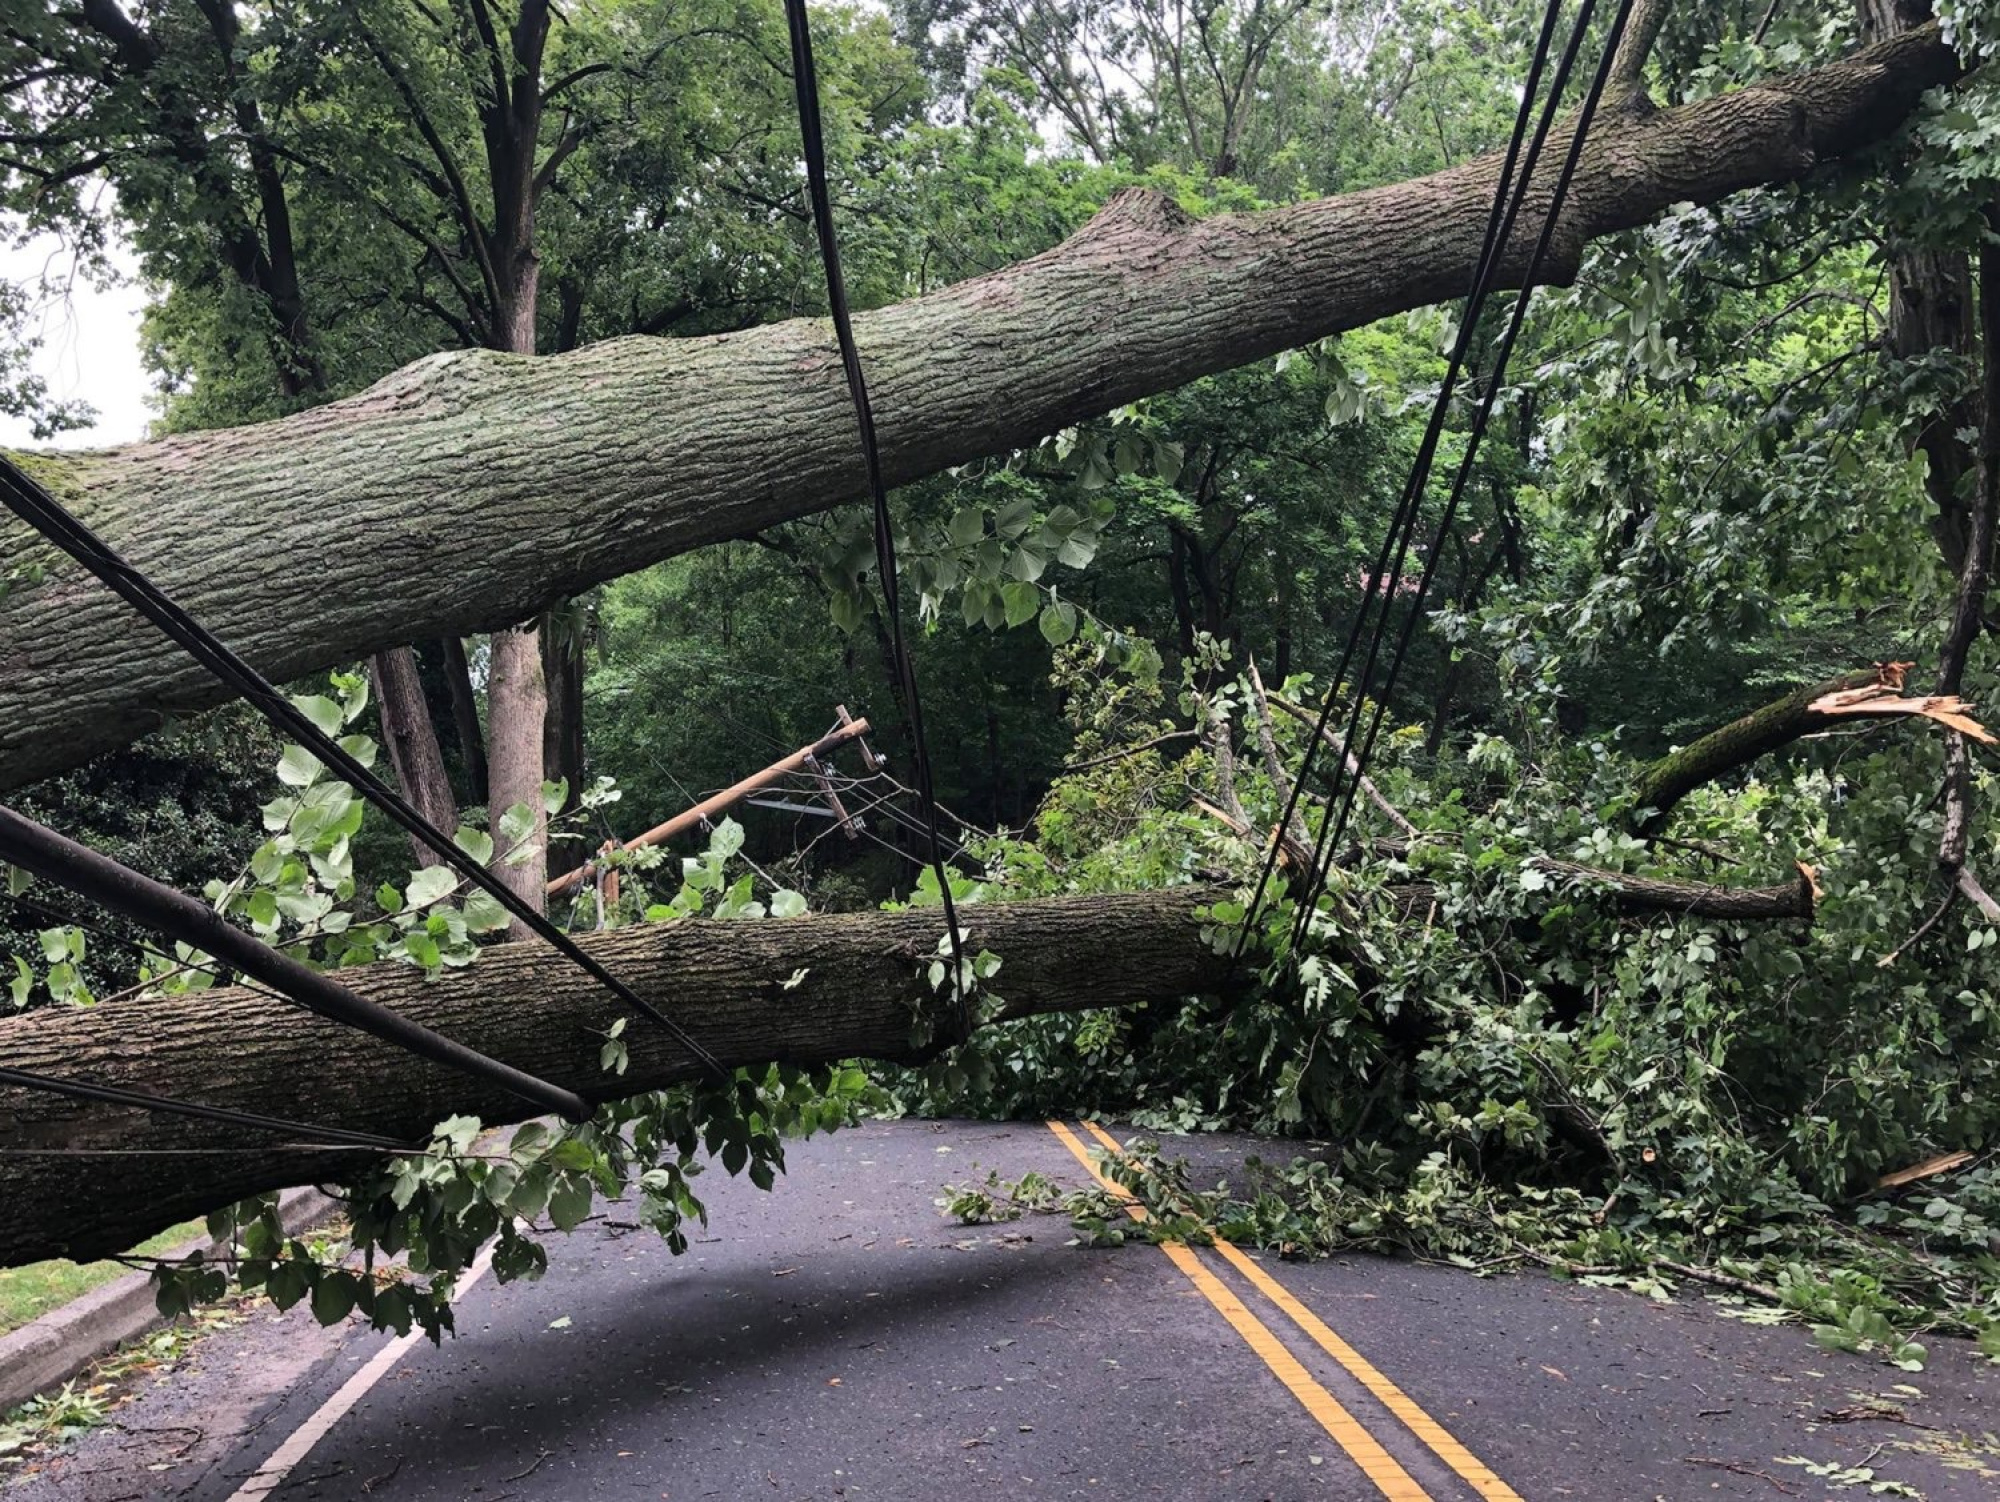 A road is blocked by a large fallen tree. The tree is held in place by electrical cables that cradle its weight just above ground